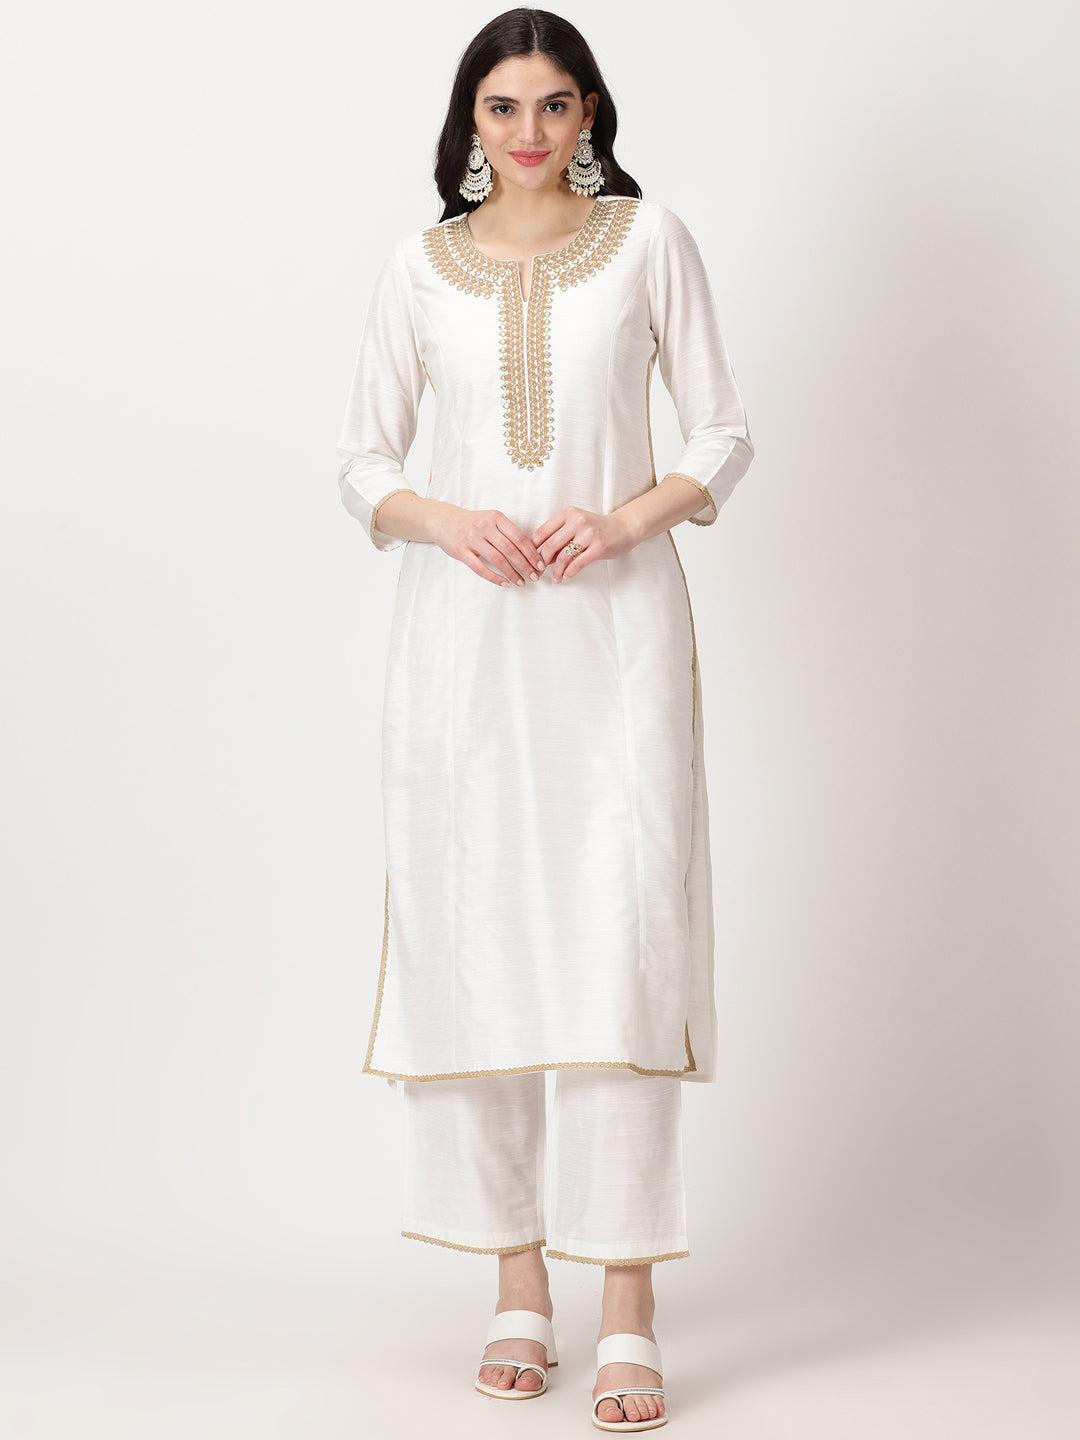 White Art Silk Kurta Set with Embroidery & Lace Details